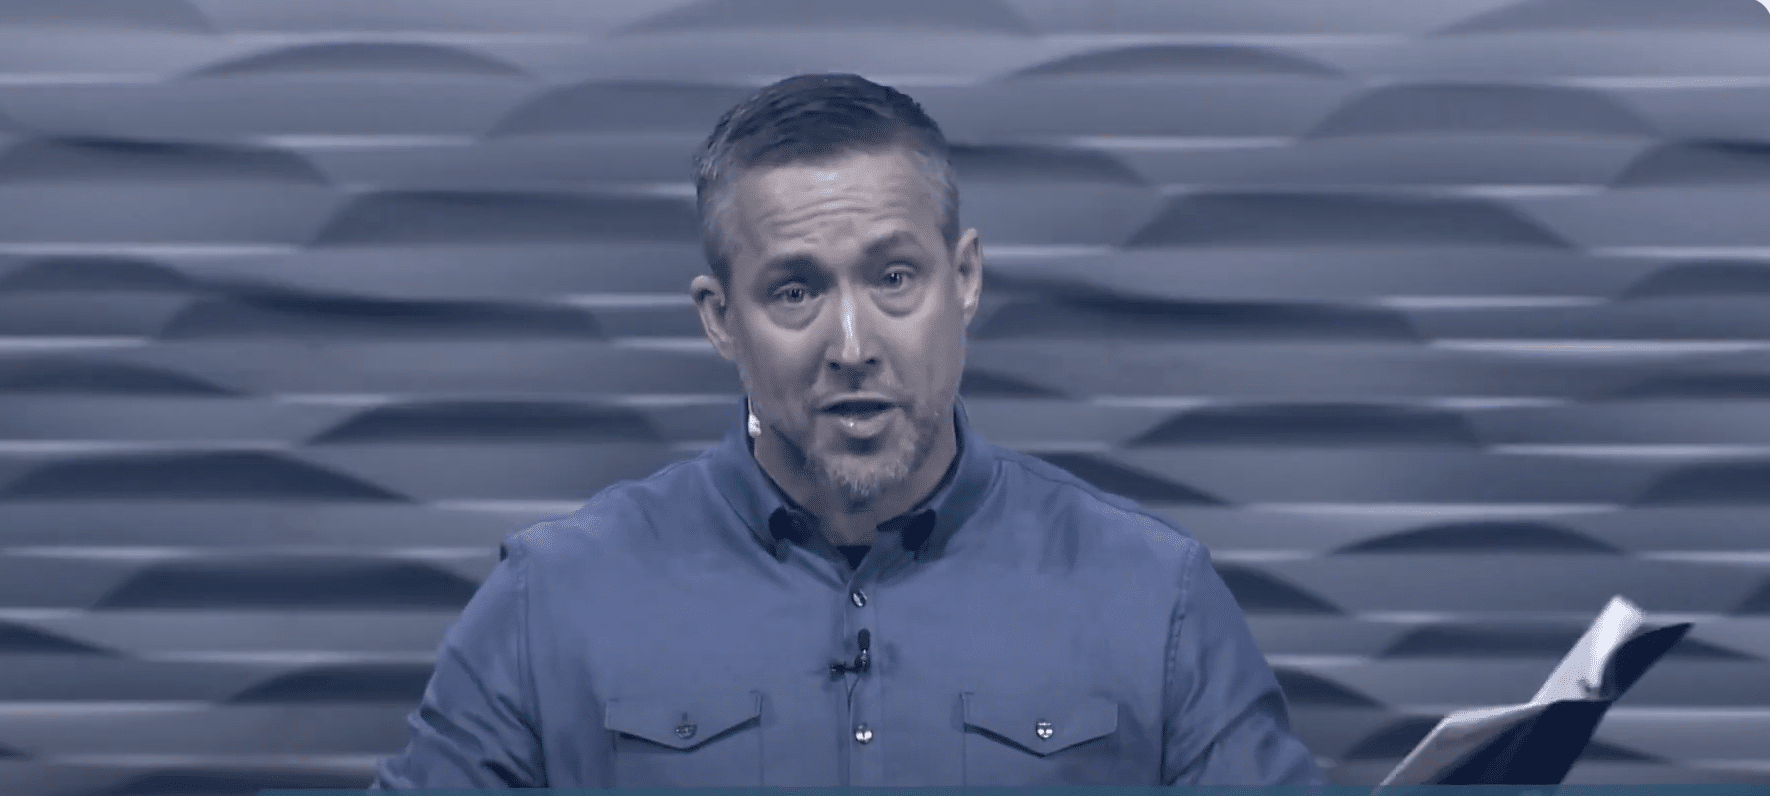 JD Greear warns Southern Baptist Convention could lose minority churches with permanent ban on women pastors